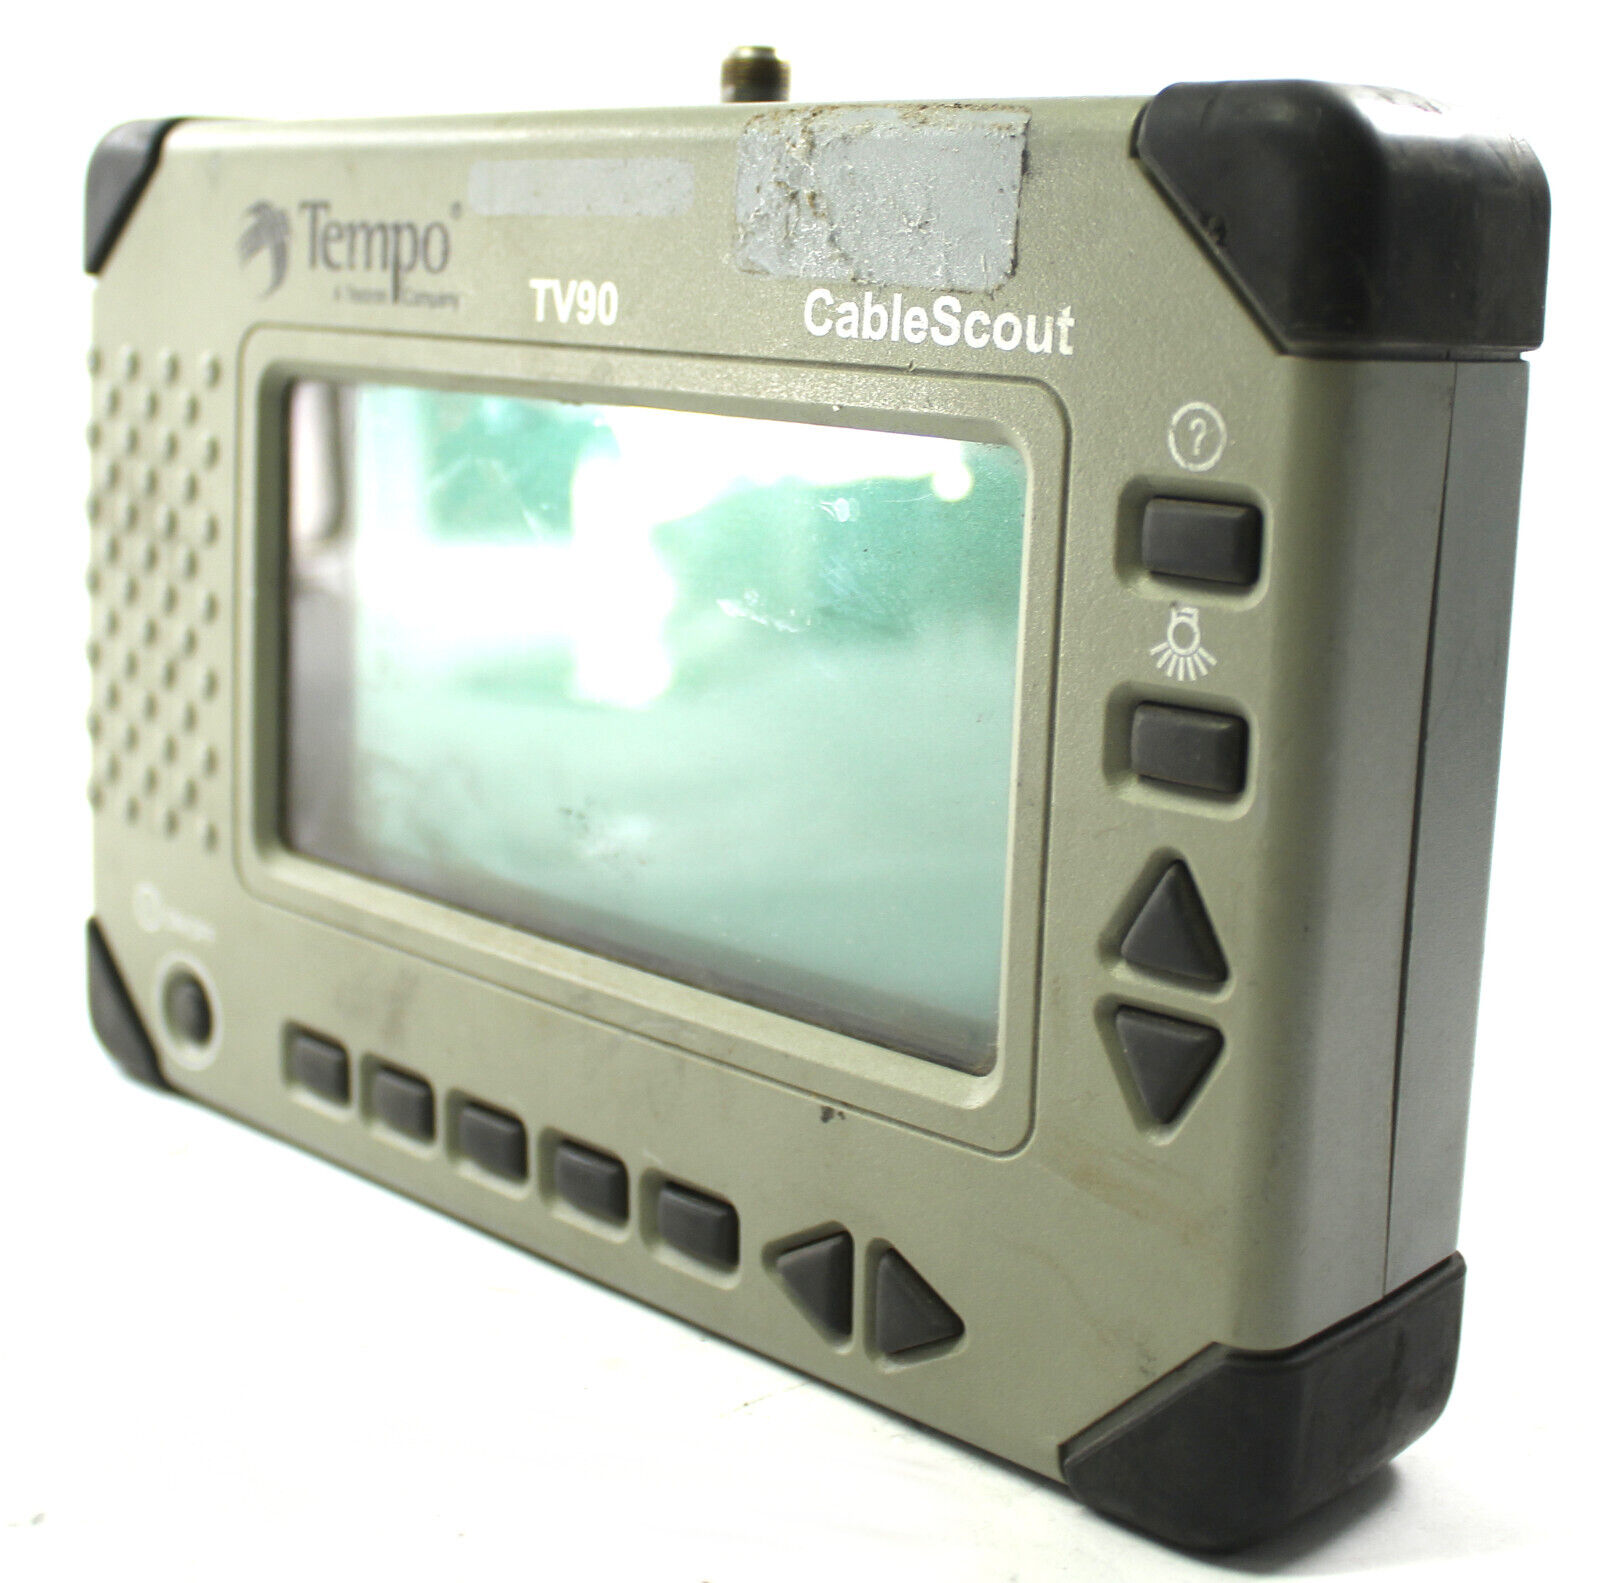 Tempo CableScout TV90 Coax CATV TDR Cable Tester USA- Missing Back Cover